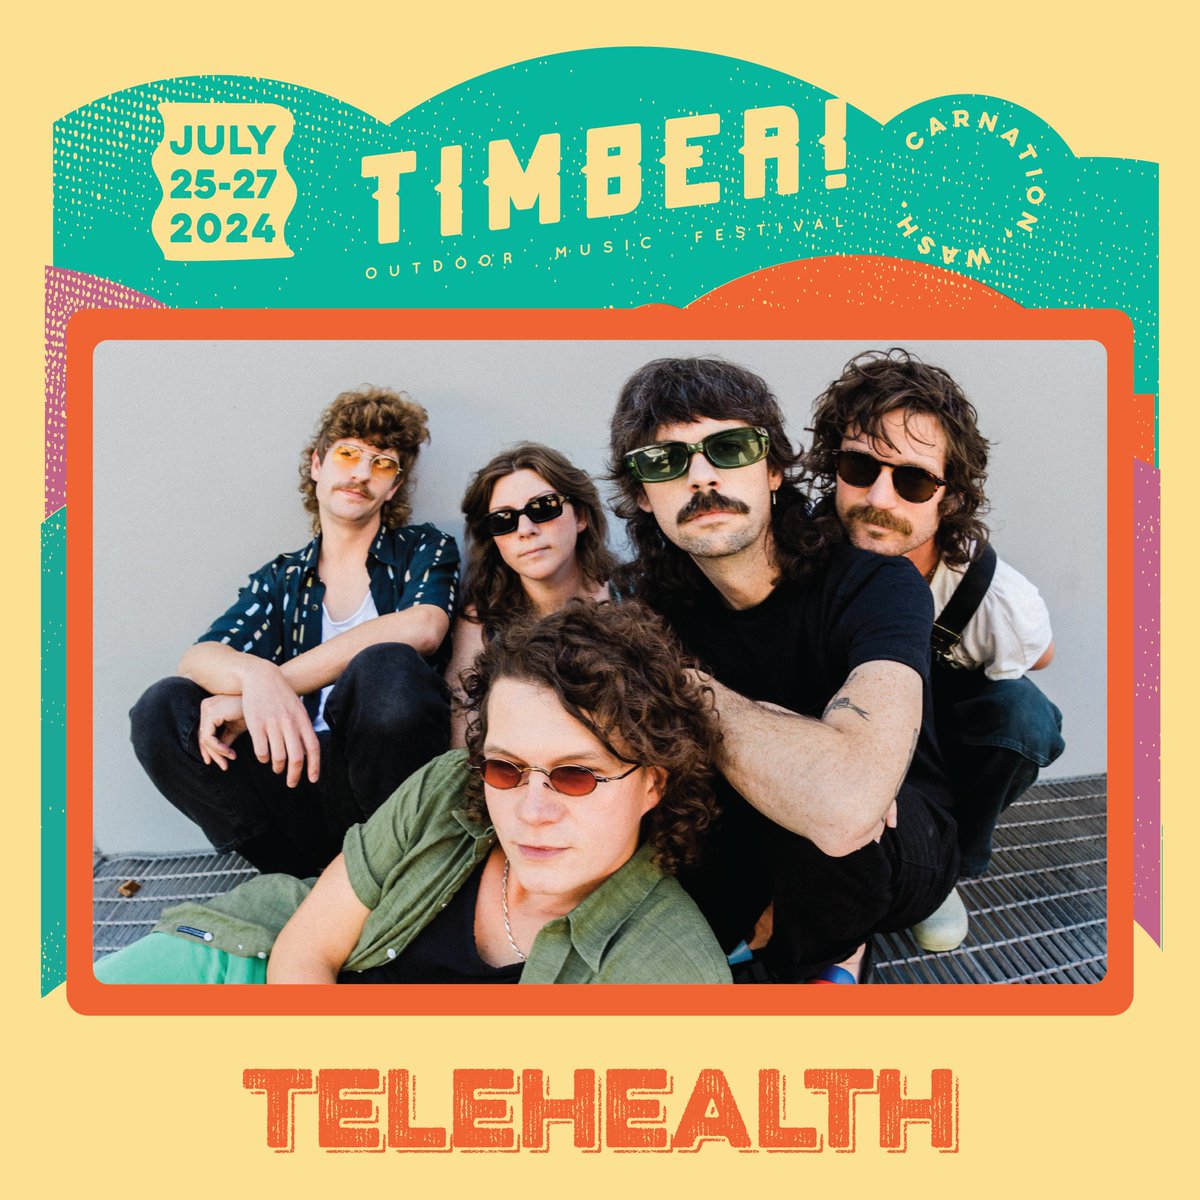 Telehealth brings unpredictable fun to Timber! on Saturday, July 27. Don't miss it! Get your tickets at timbermusicfest.com.